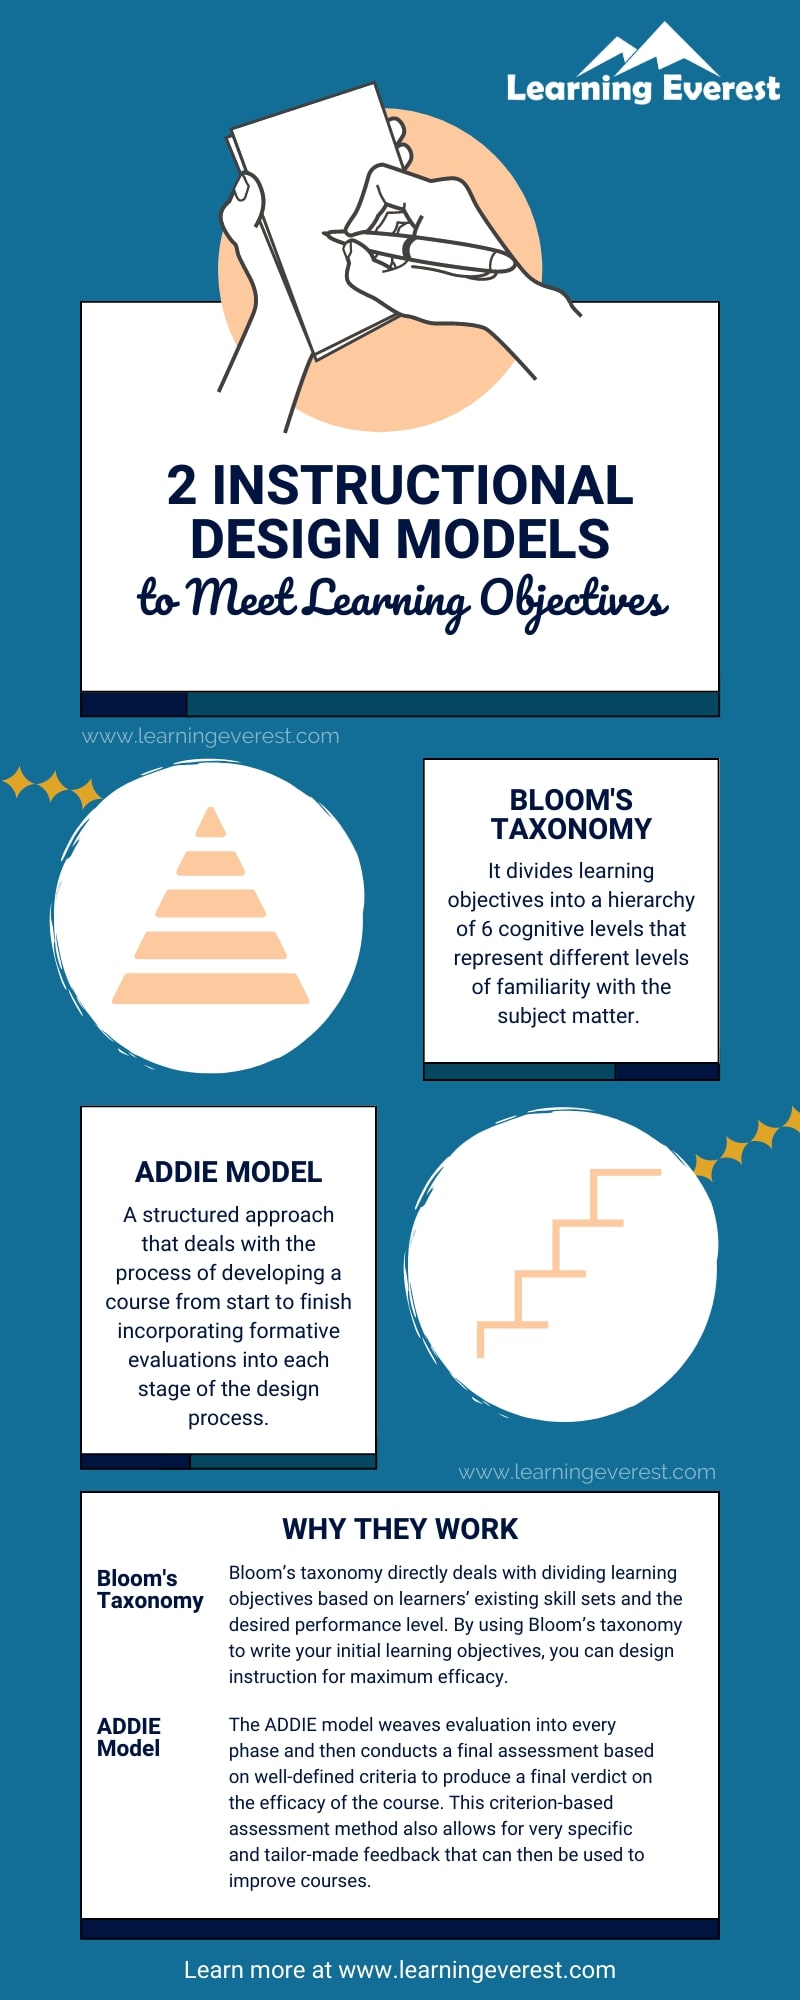 2 Famous Instructional Design Models to Meet Learning Objectives